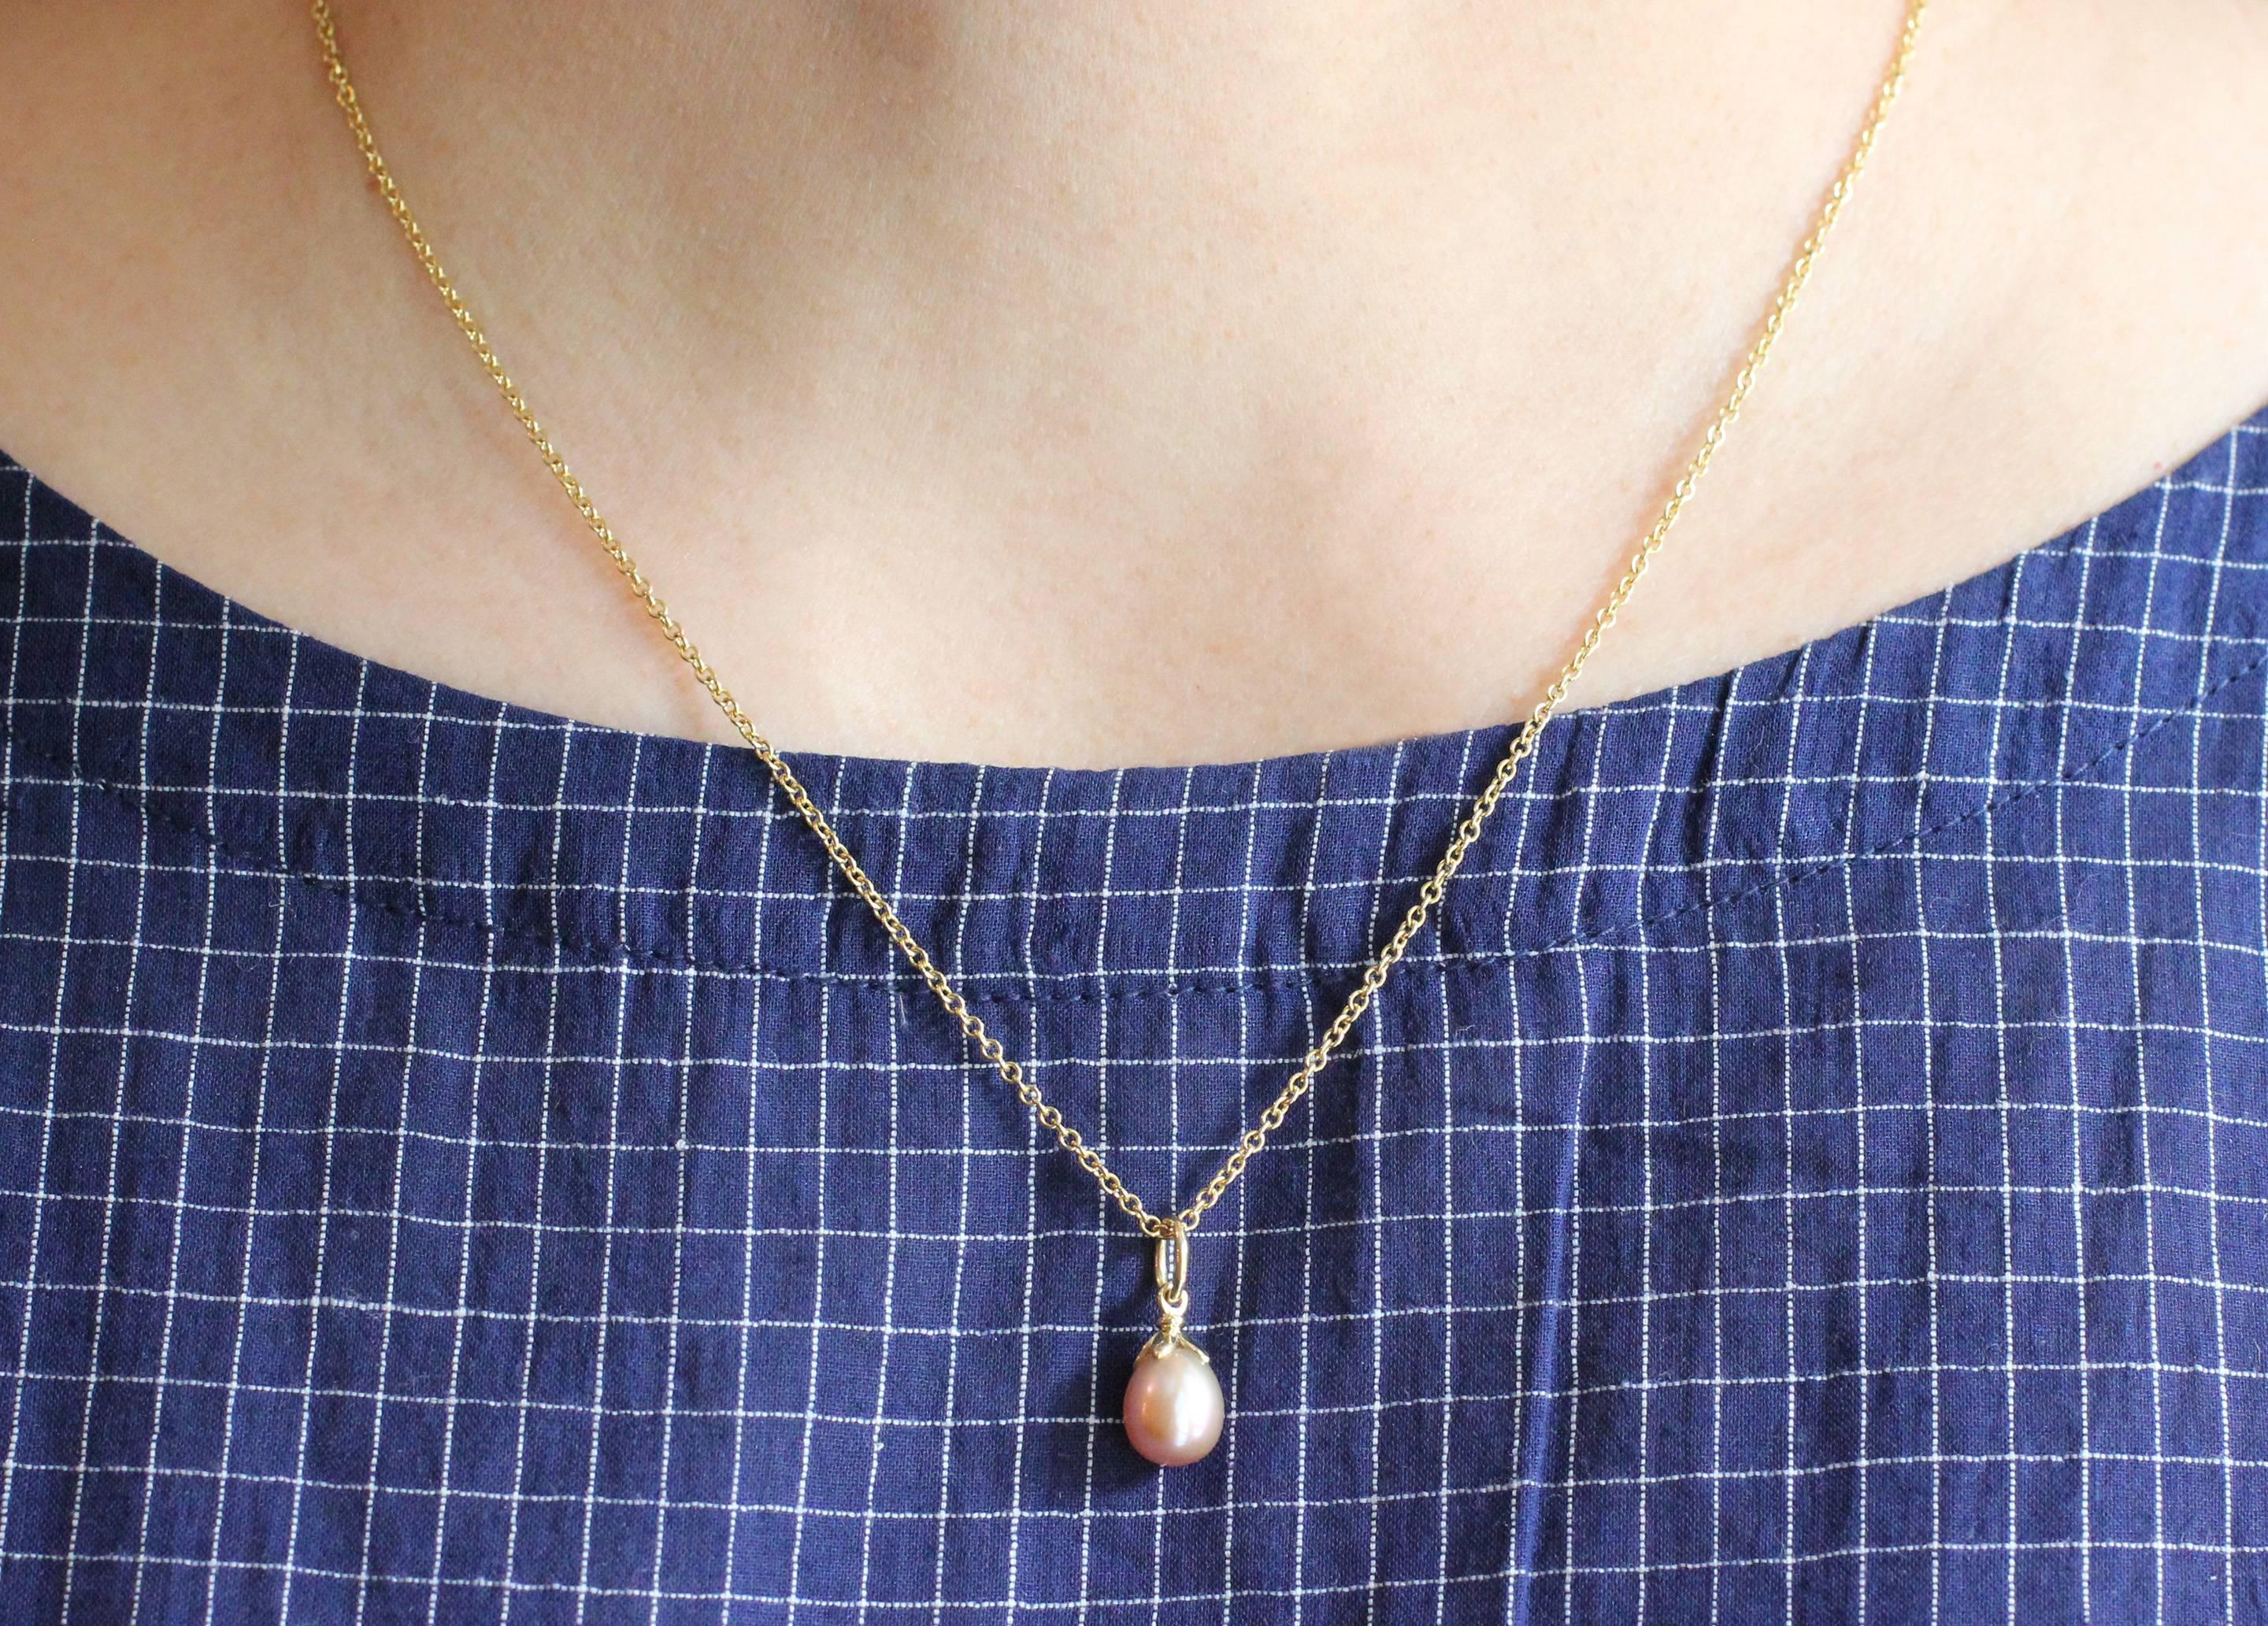 Made in 18 Kt Gold and featuring a beautiful, lustrous pink freshwater pearl pendant.  17